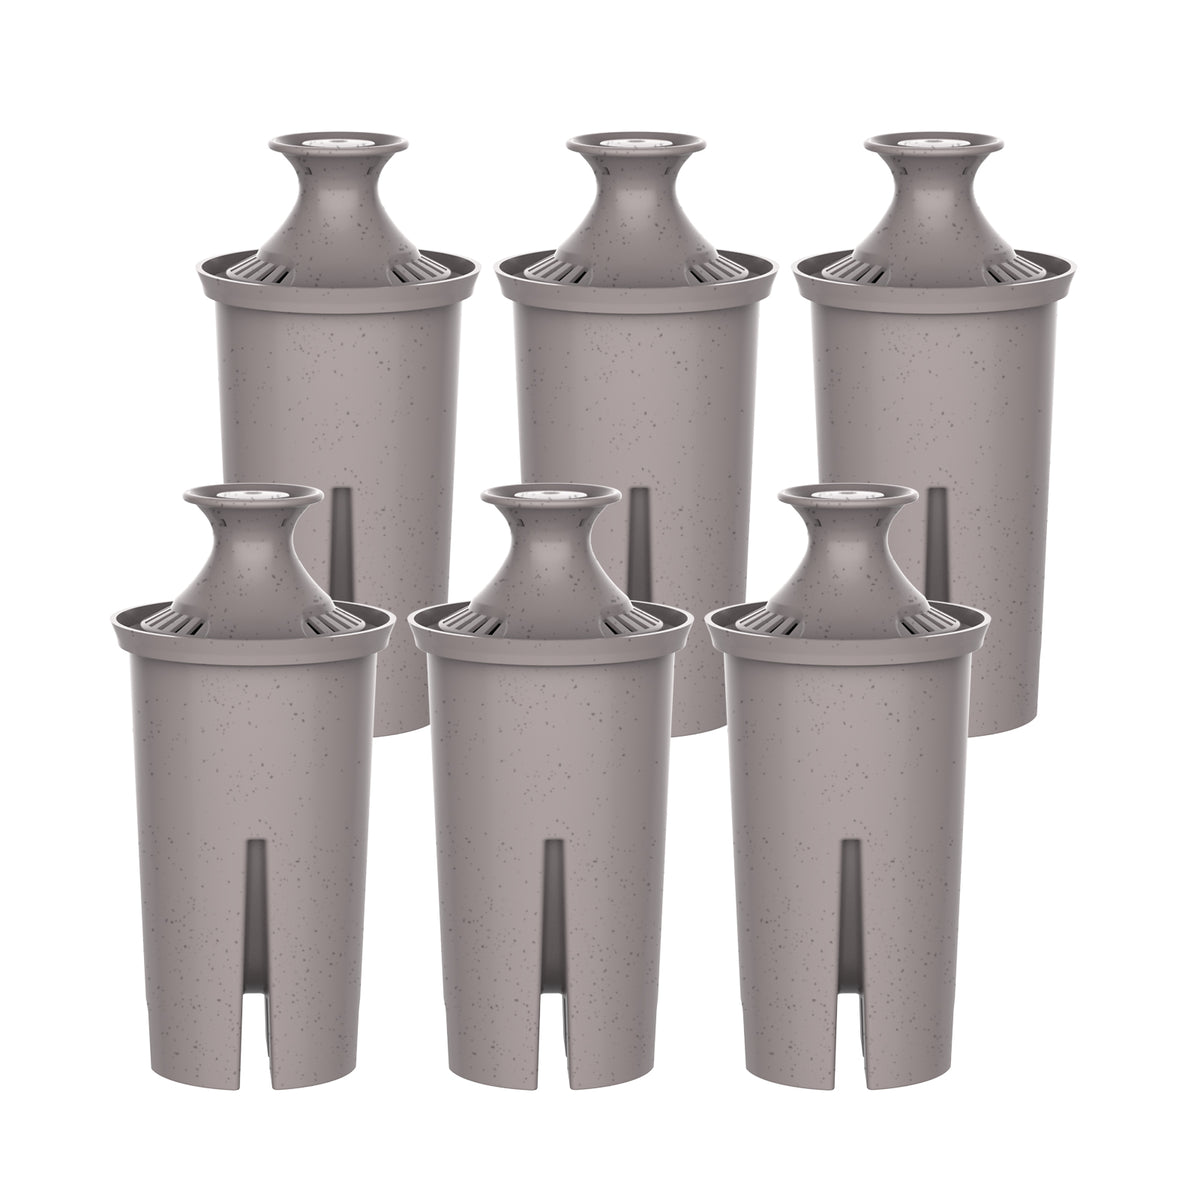 6Packs Biodegradable and Eco-Friendly Water Filter Replacements for Brita® Water Pitchers and Dispensers